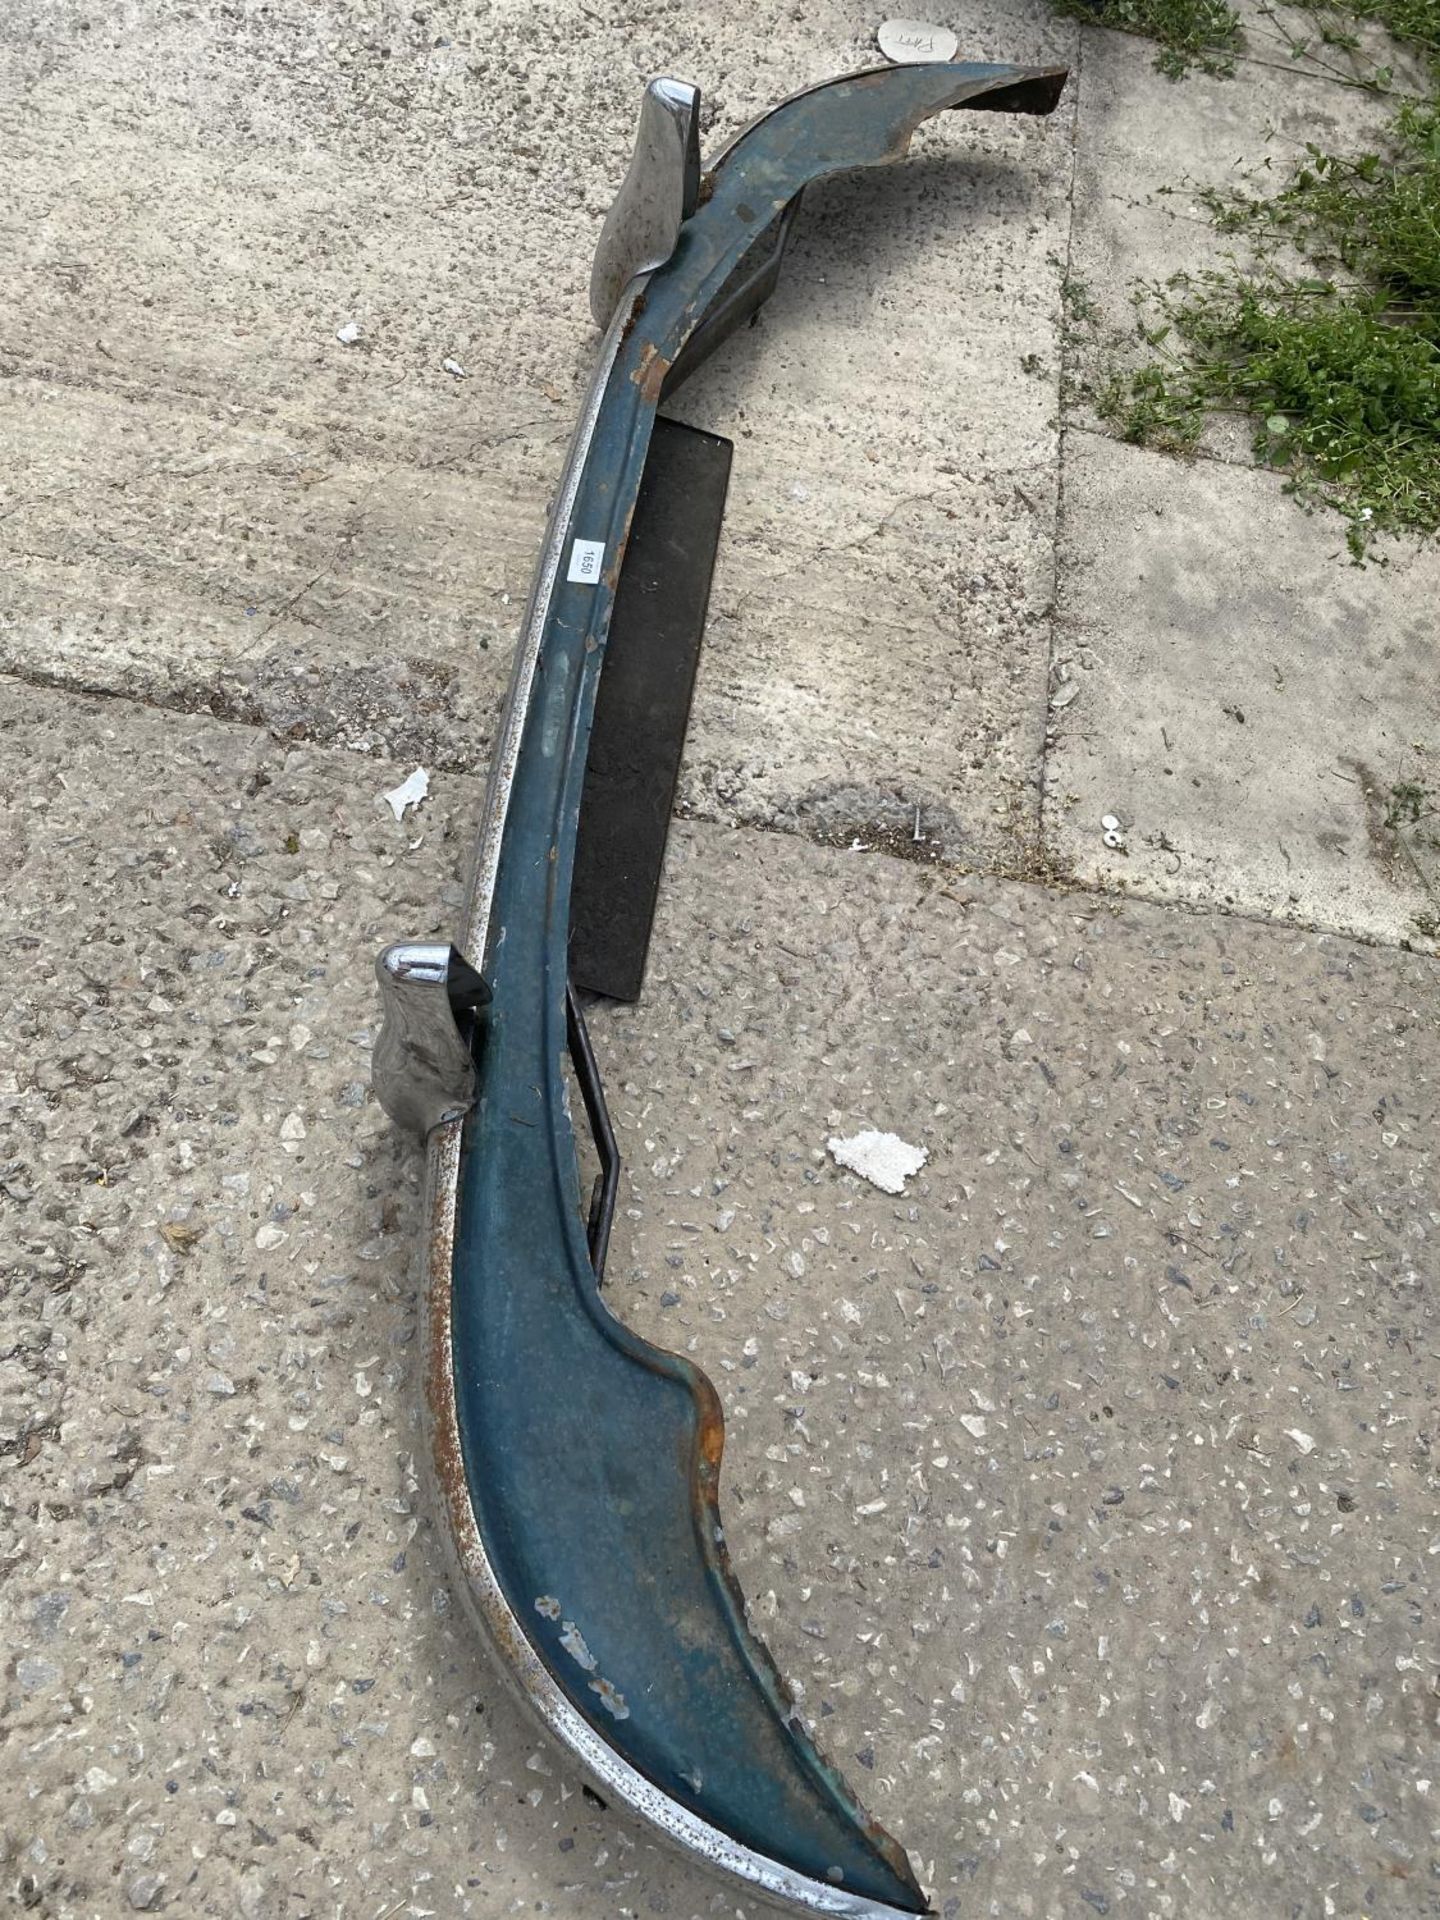 A CHROME CAR BUMPER BELIEVED TO BE FROM A MORRIS MINOR - Image 6 of 6